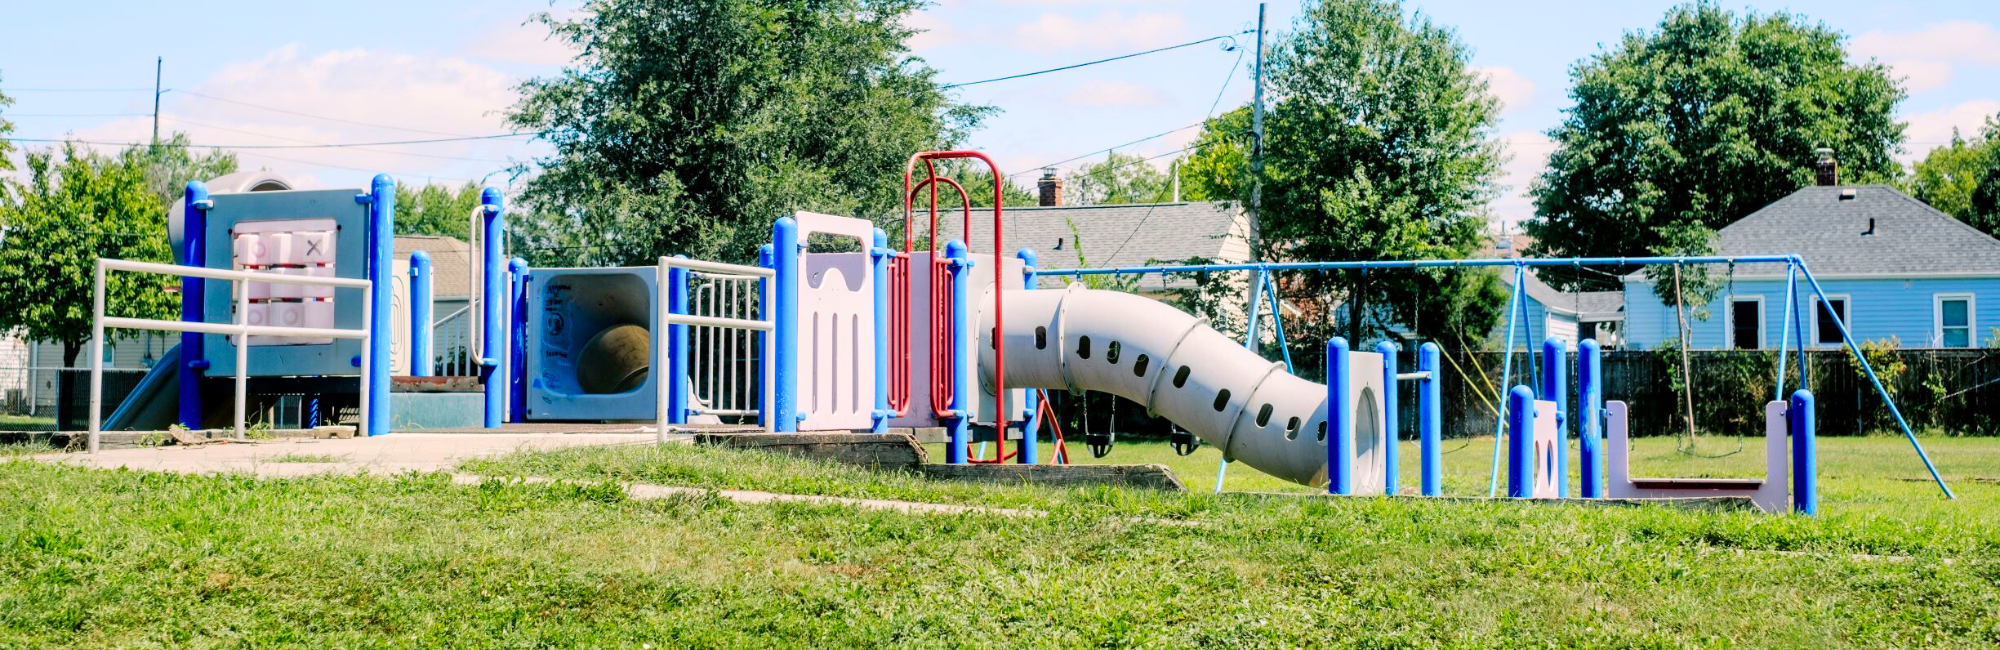 playground in a park